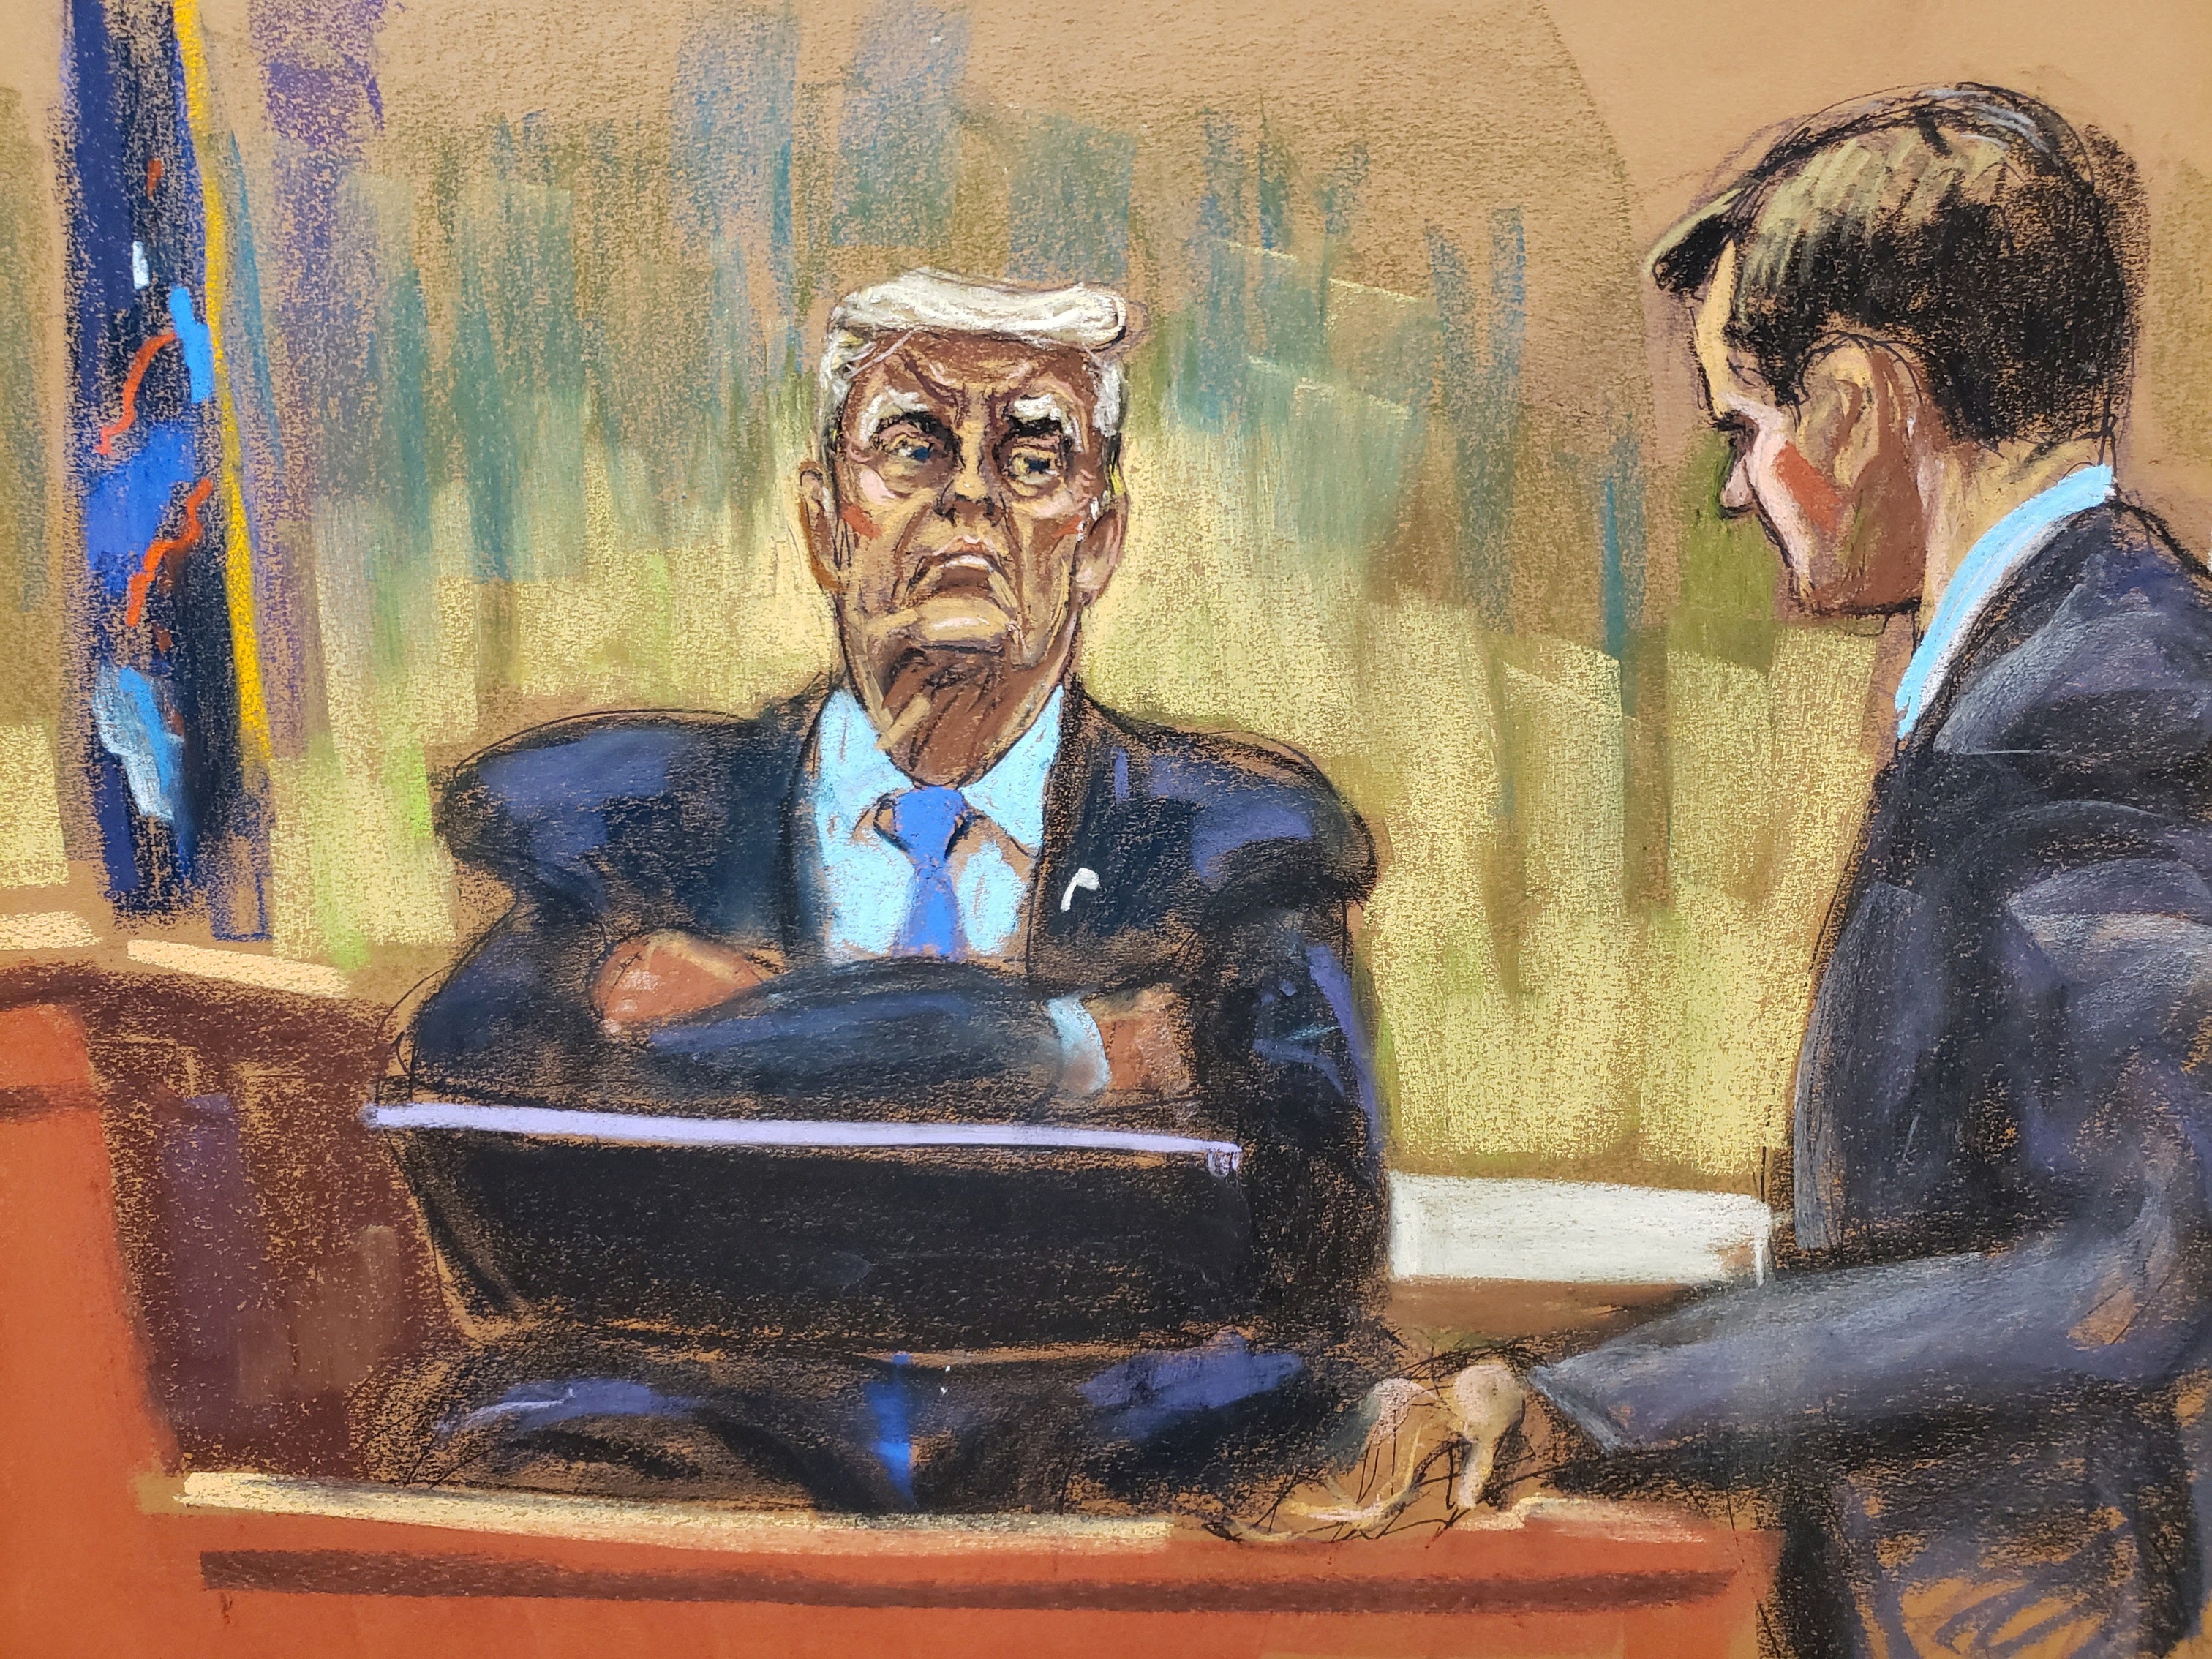 Another courtroom sketch of Donald Trump testifying on stand